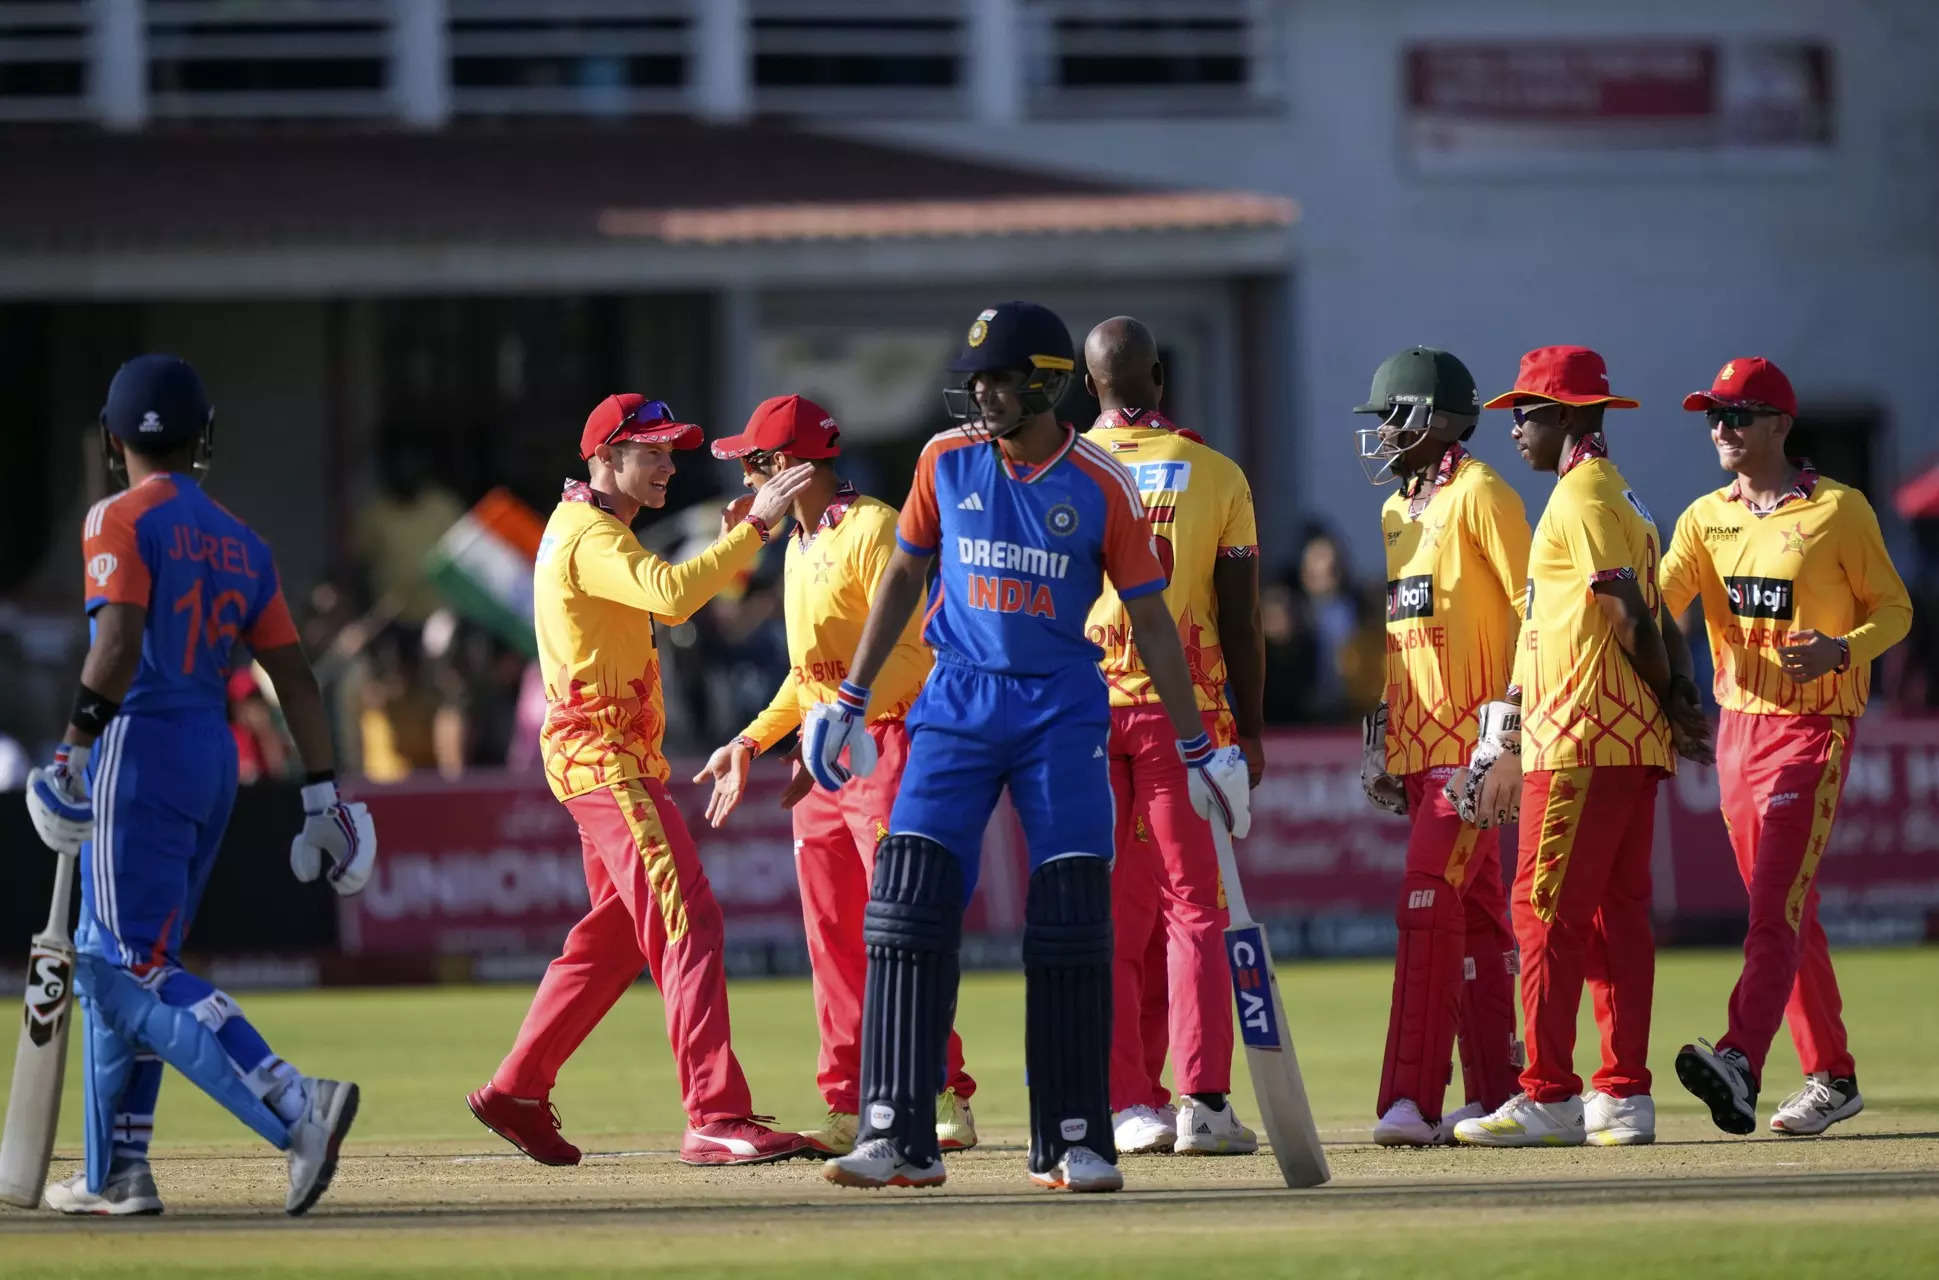 India vs Zimbabwe 4th T20 Live Streaming: When, where and how to watch 4rd T20I? Here are all the details 